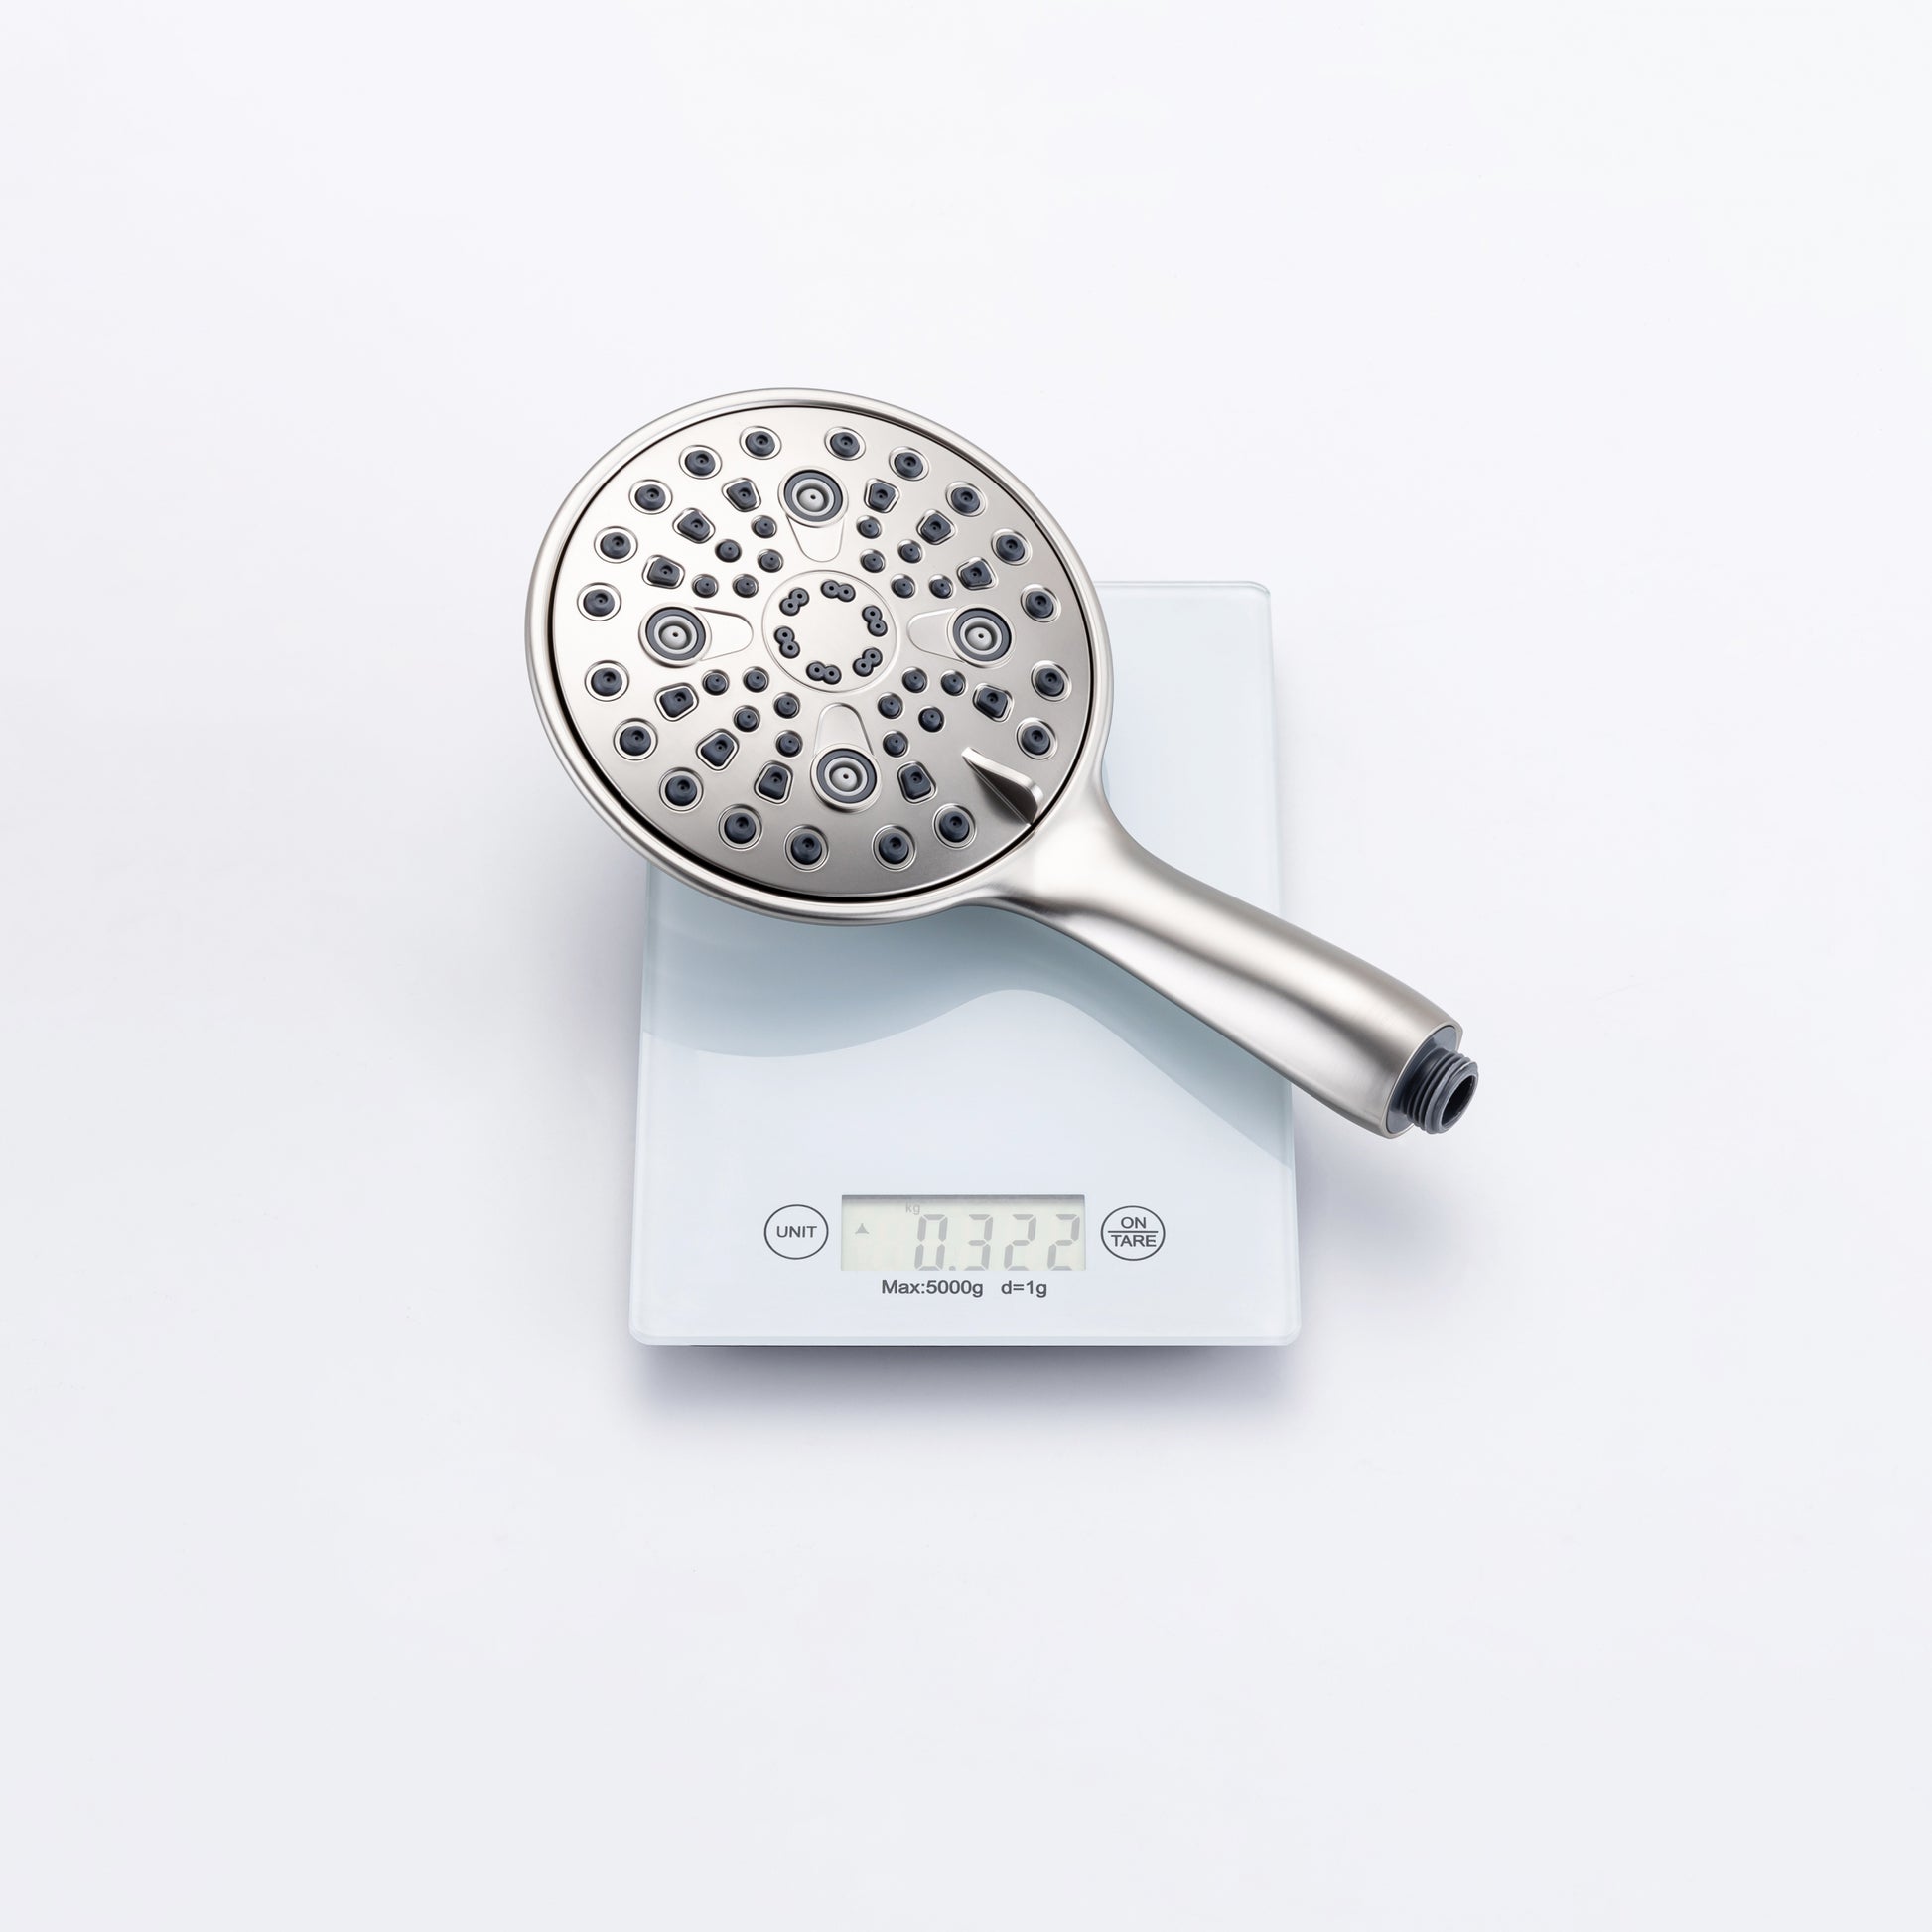 Cobbe 8 Functions Shower Head with handheld High brushed nickel-metal